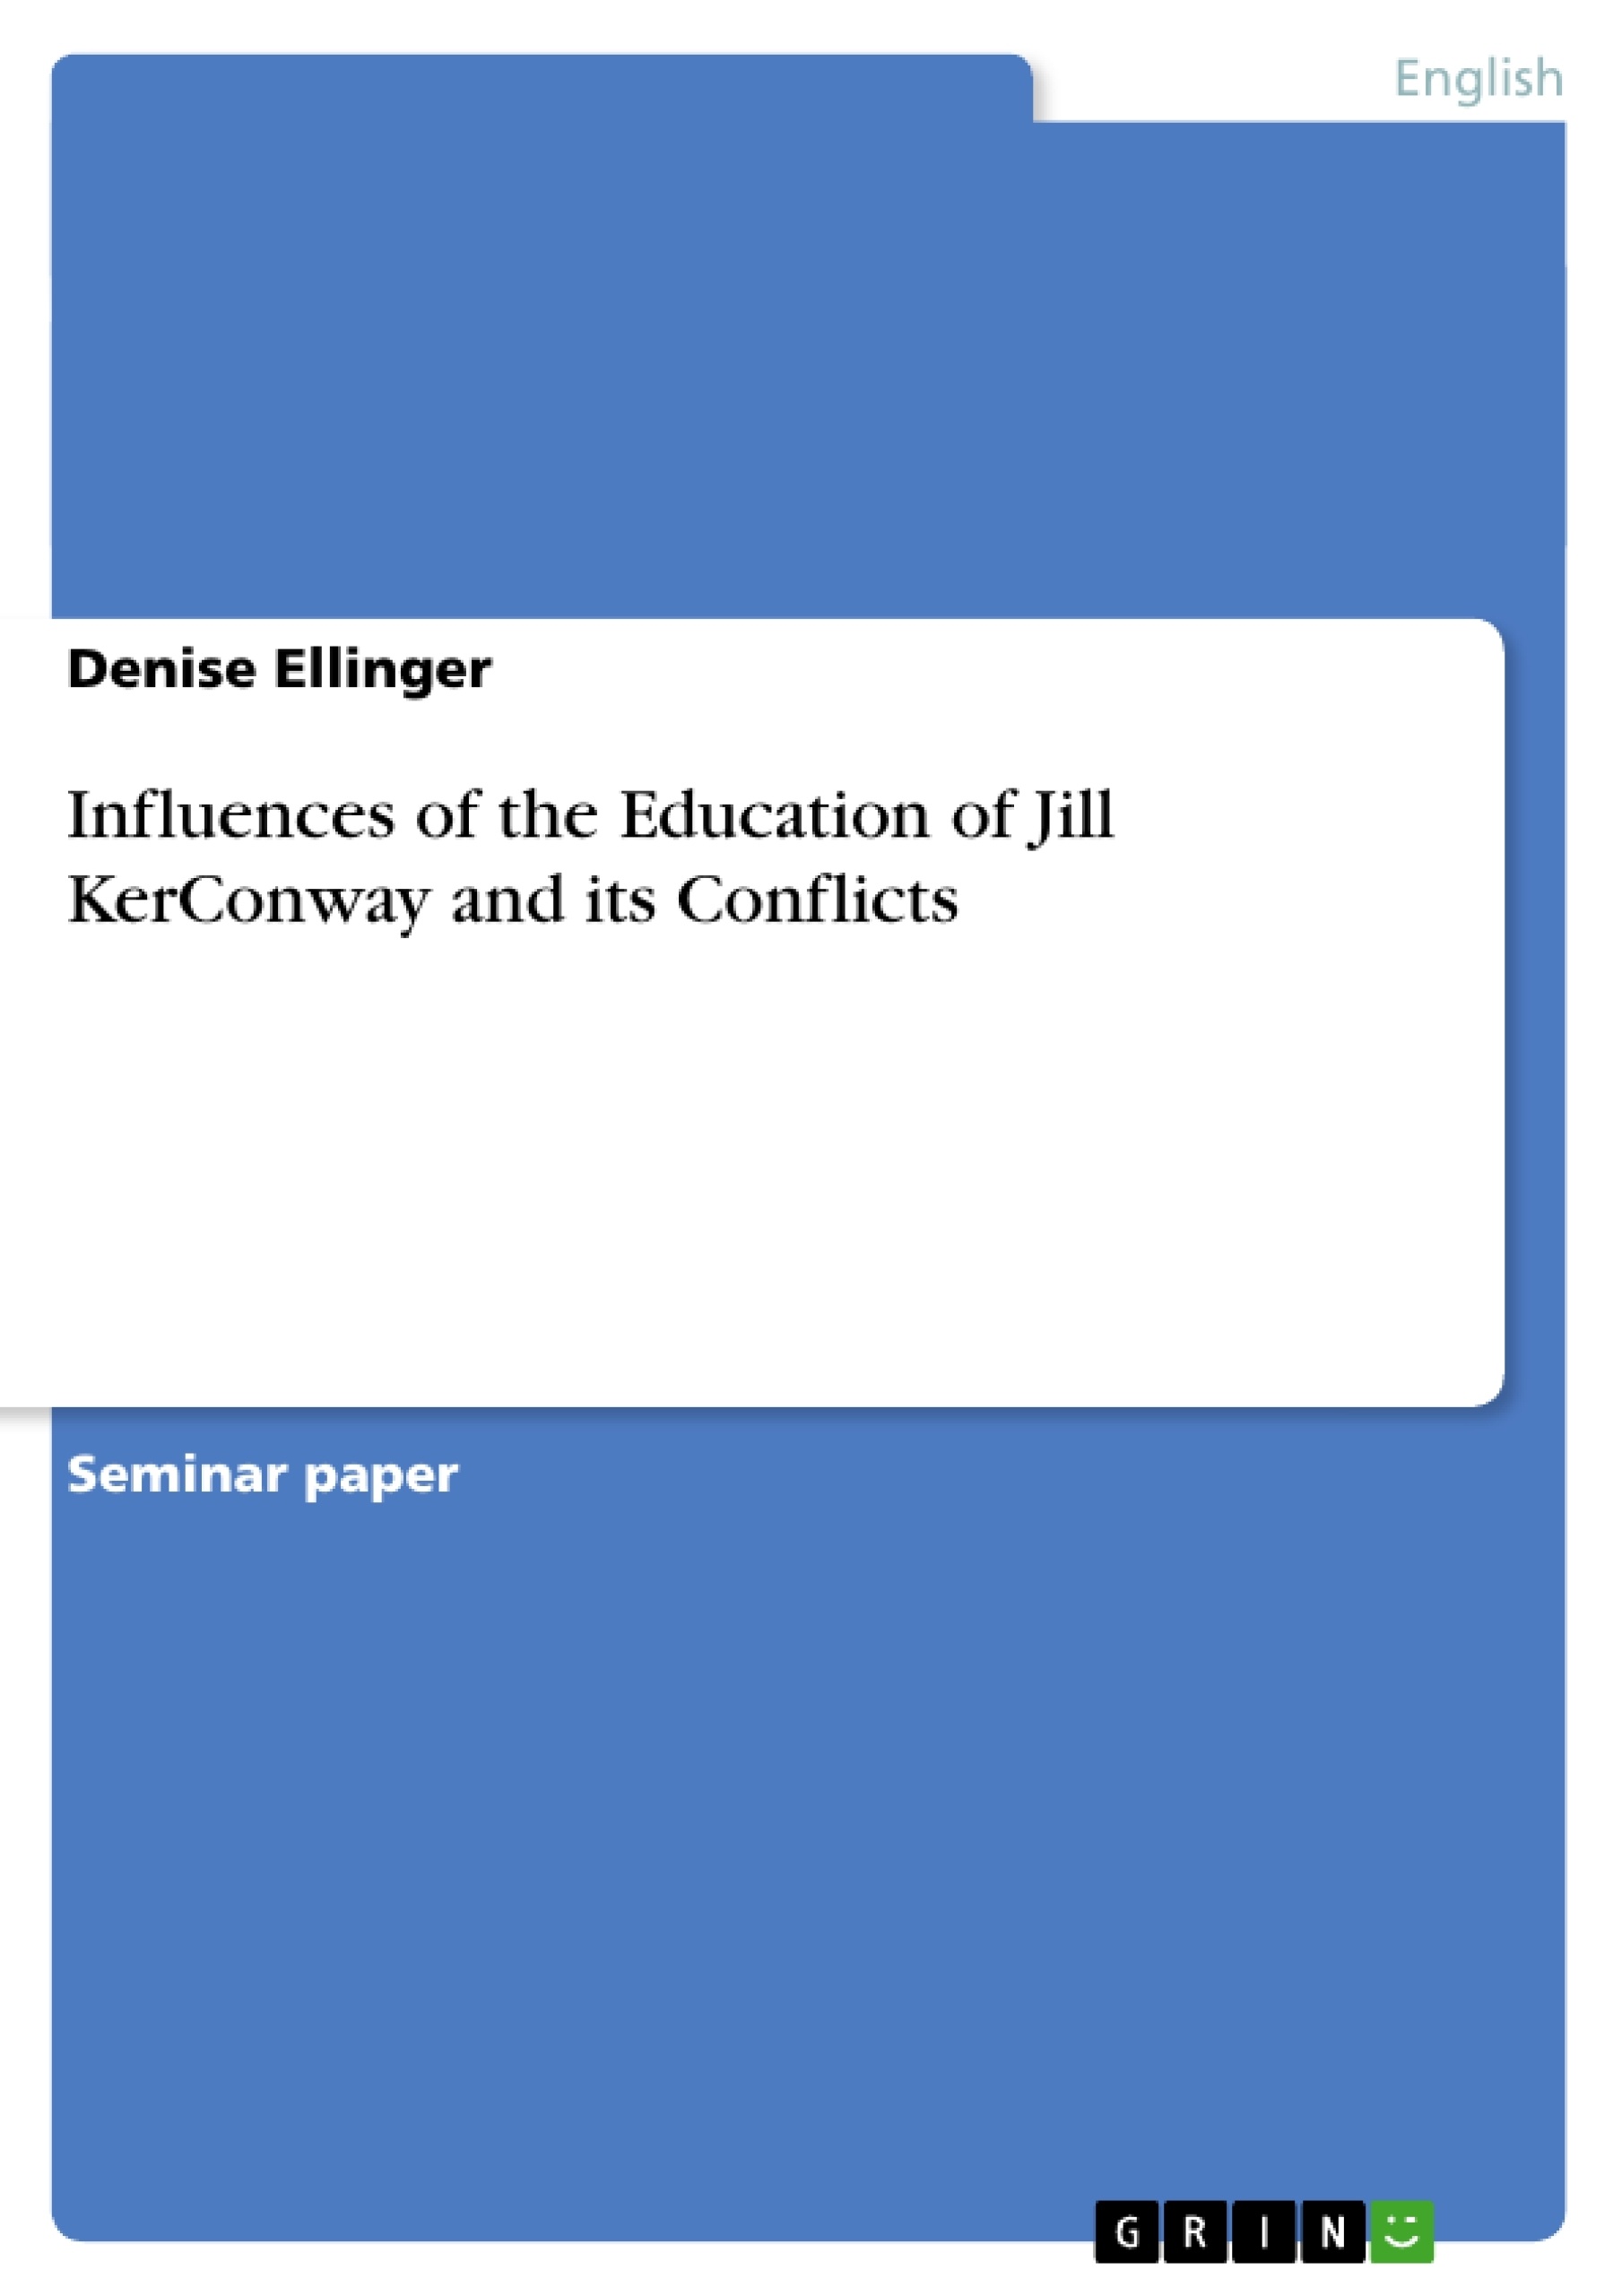 Title: Influences of the Education of Jill KerConway and its Conflicts